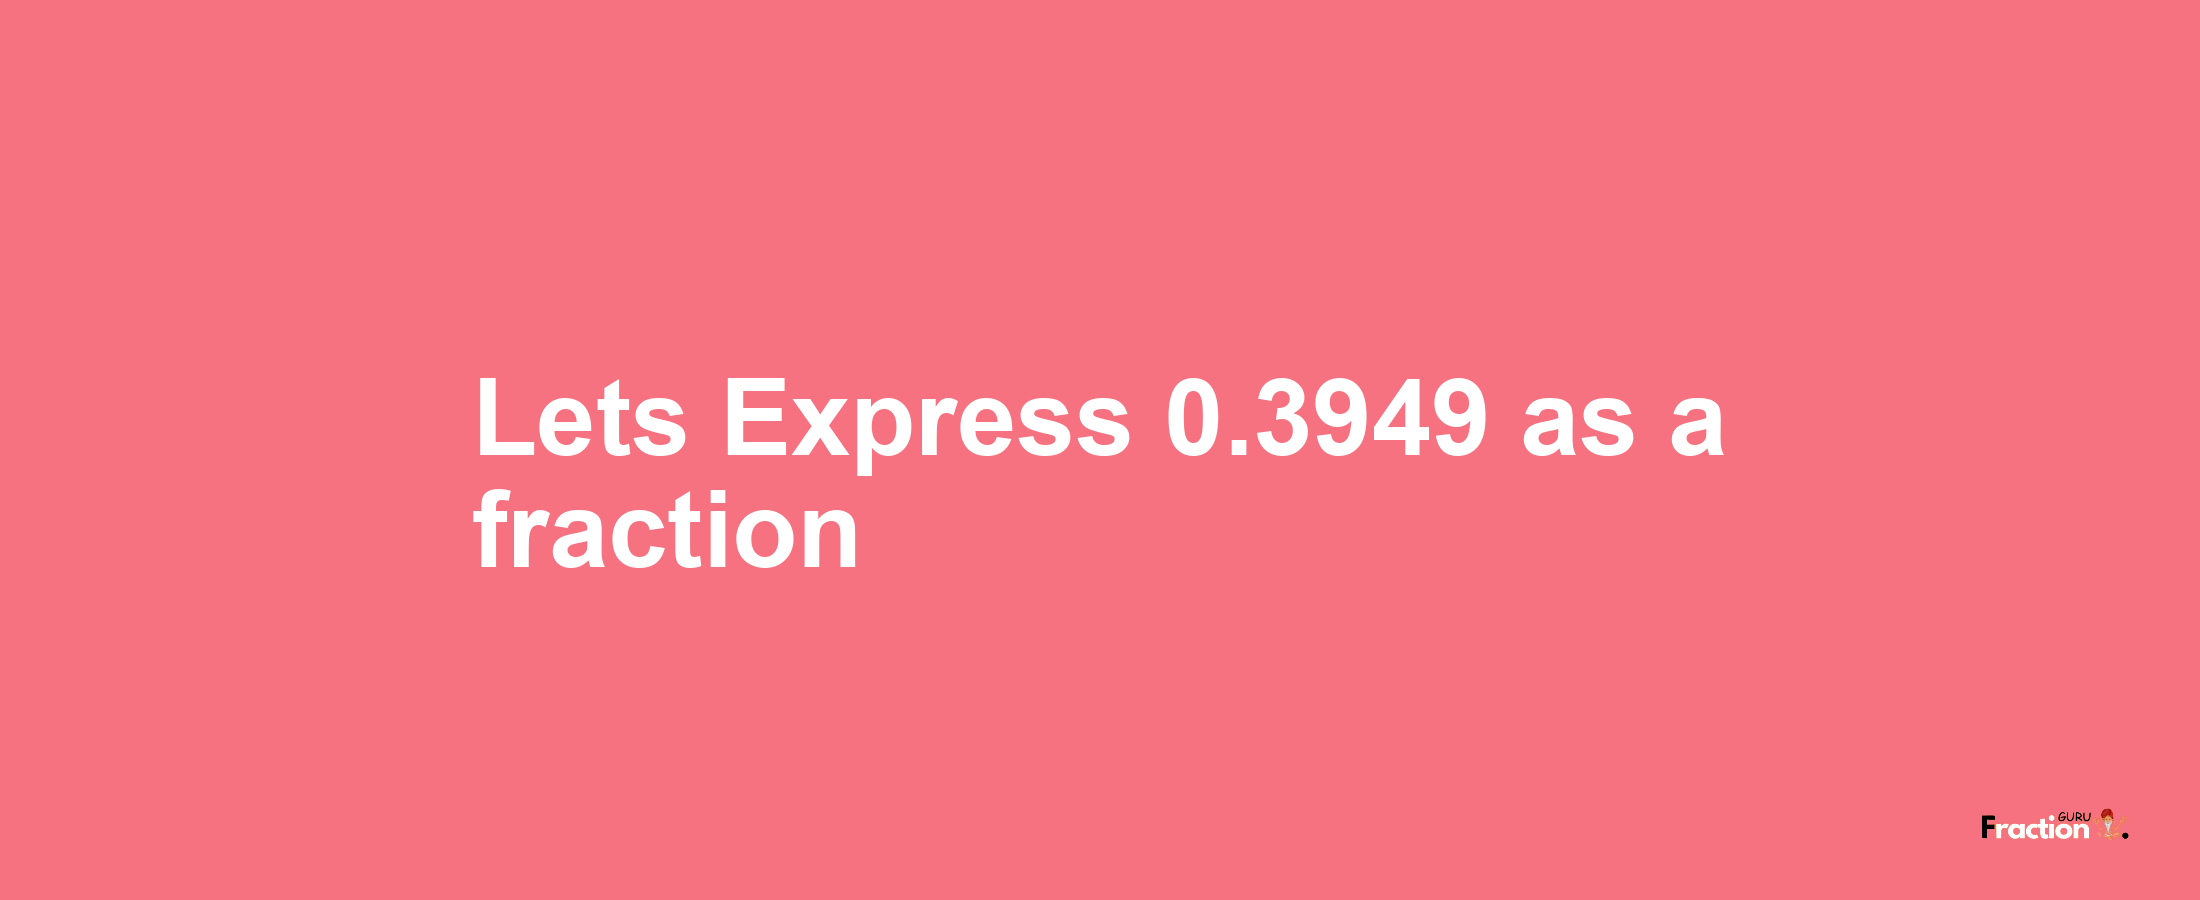 Lets Express 0.3949 as afraction